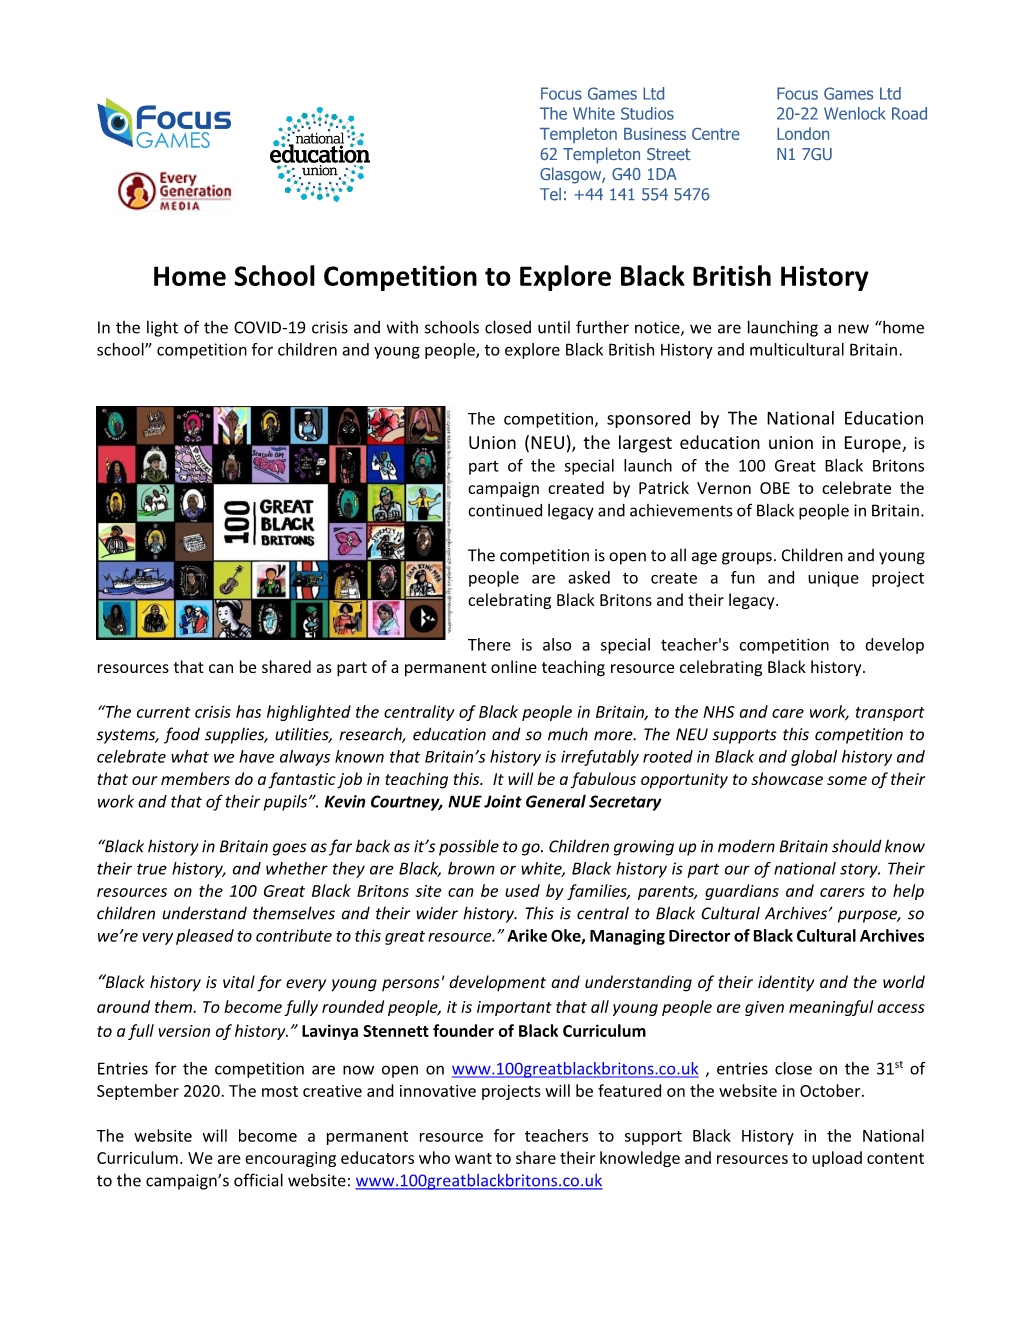 Home School Competition to Explore Black British History